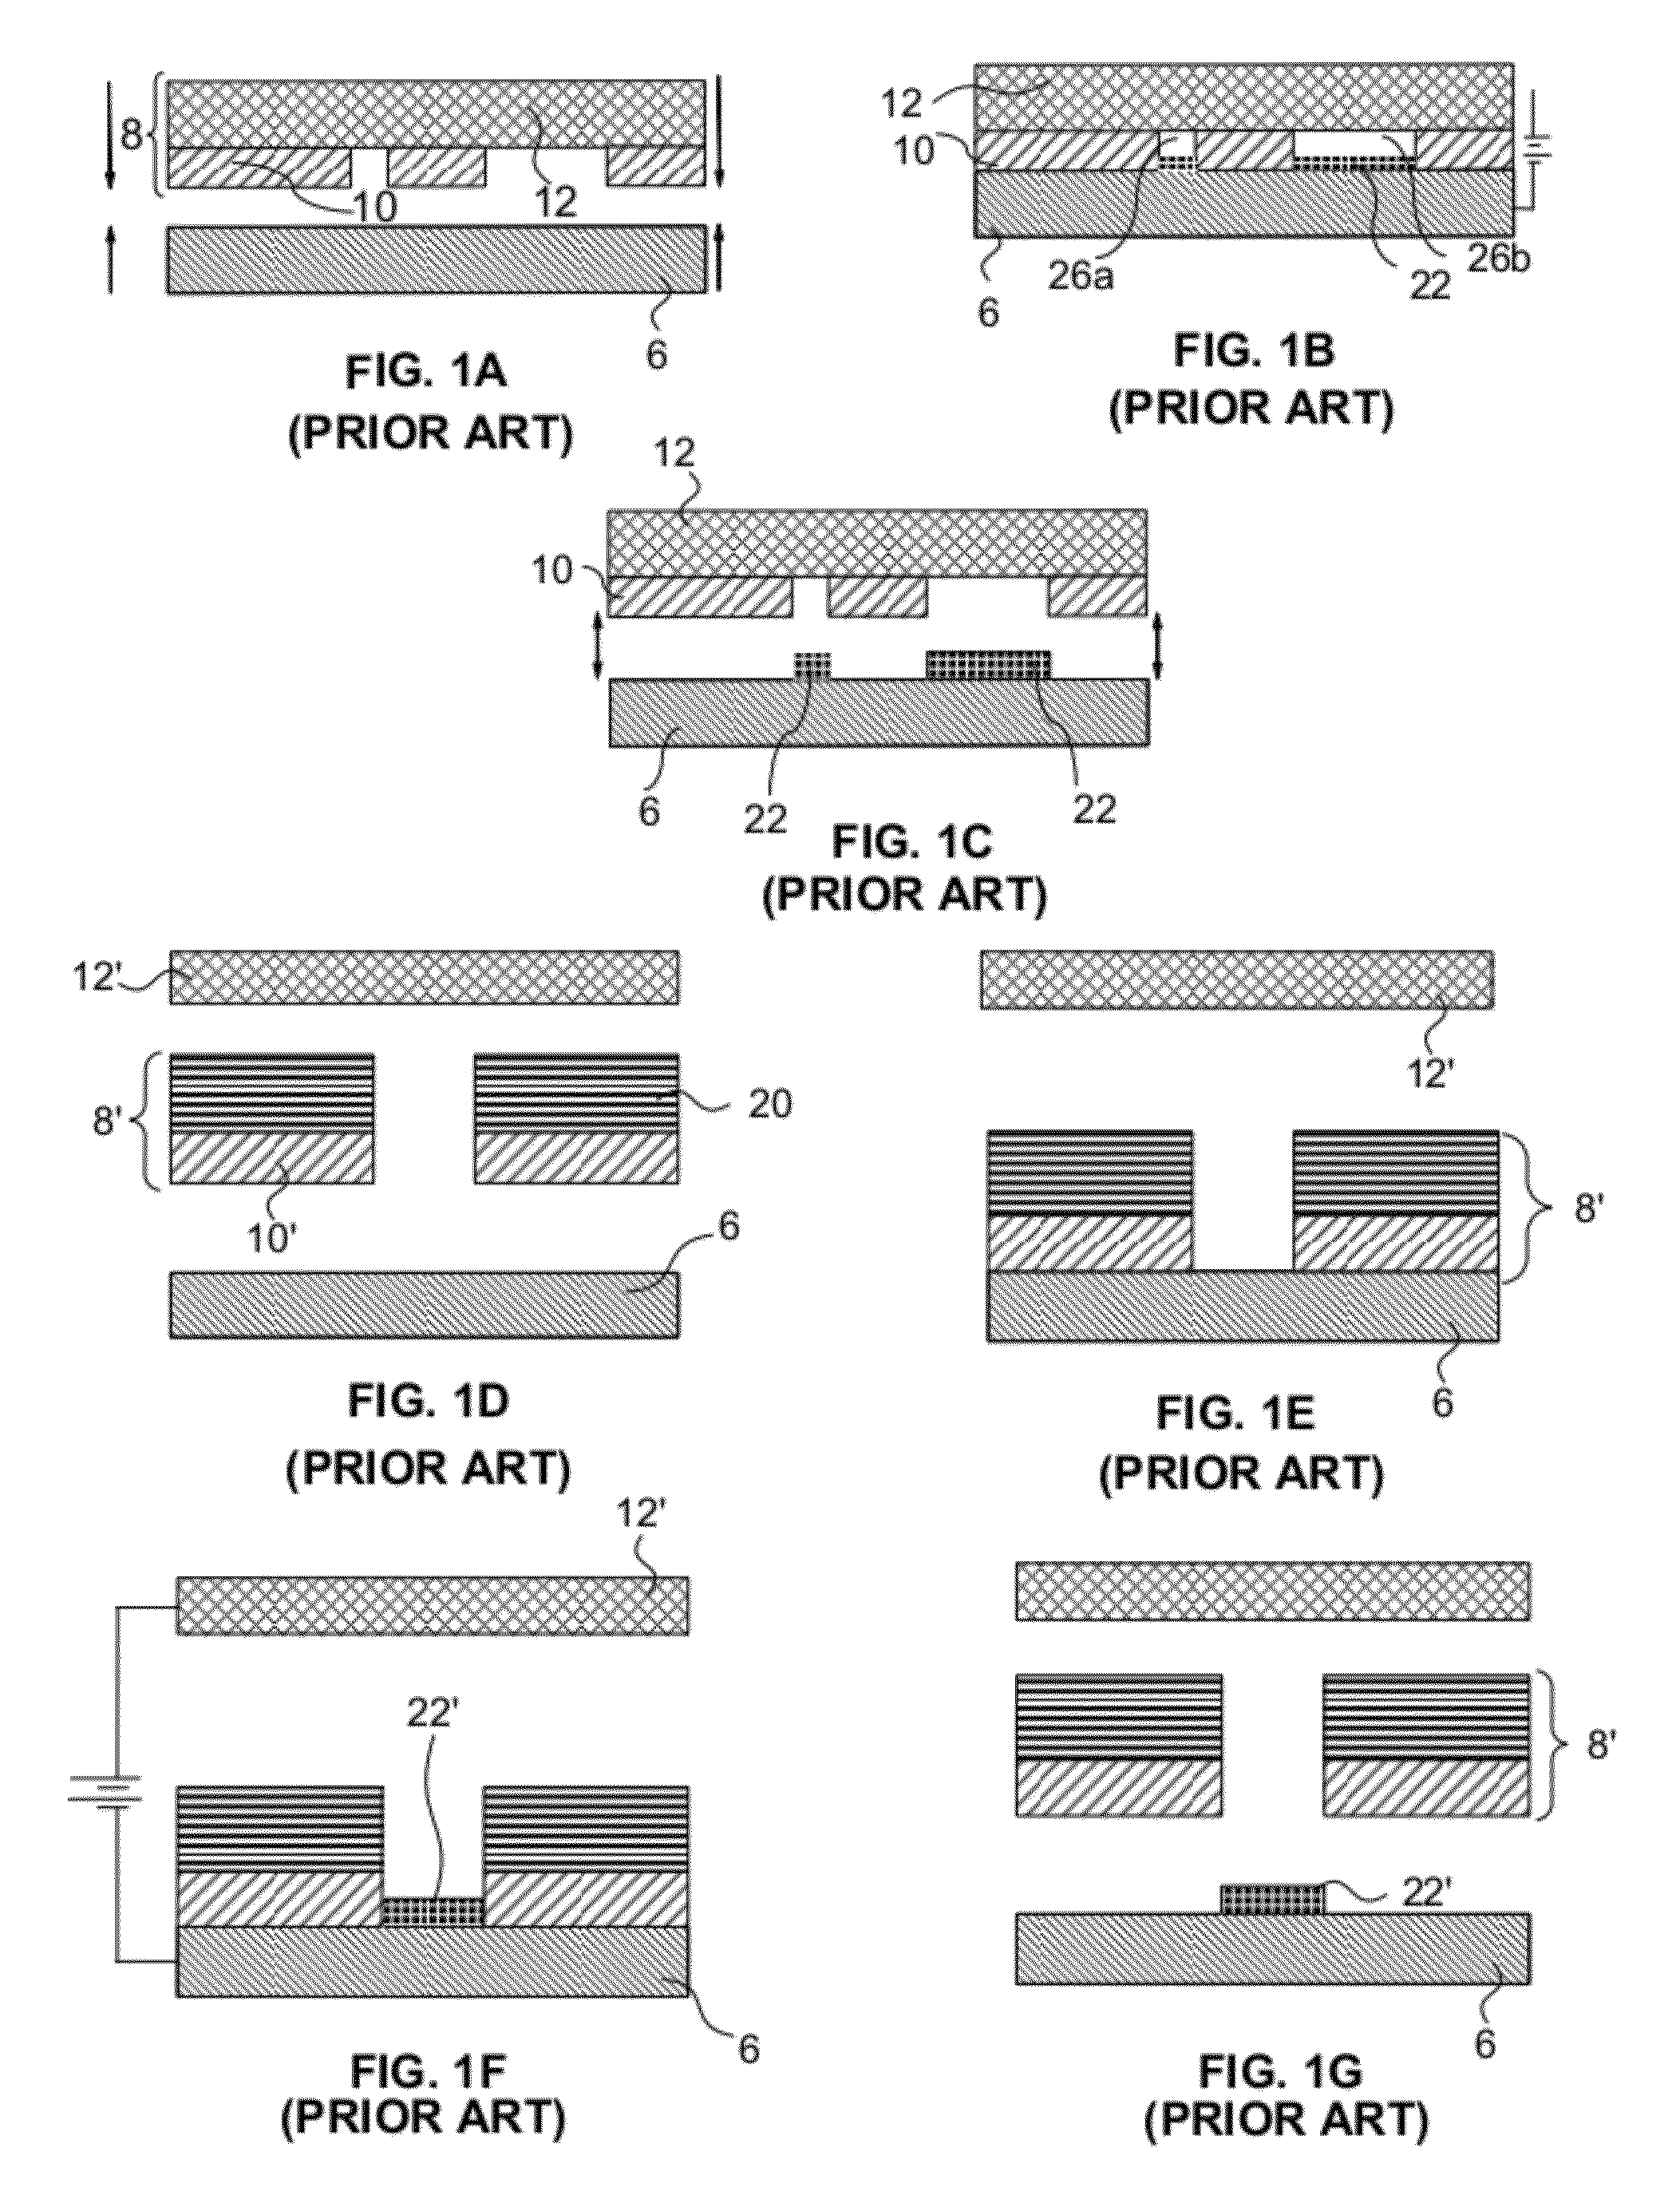 Enhanced methods for at least partial in situ release of sacrificial material from cavities or channels and/or sealing of etching holes during fabrication of multi-layer microscale or millimeter-scale complex three-dimensional structures